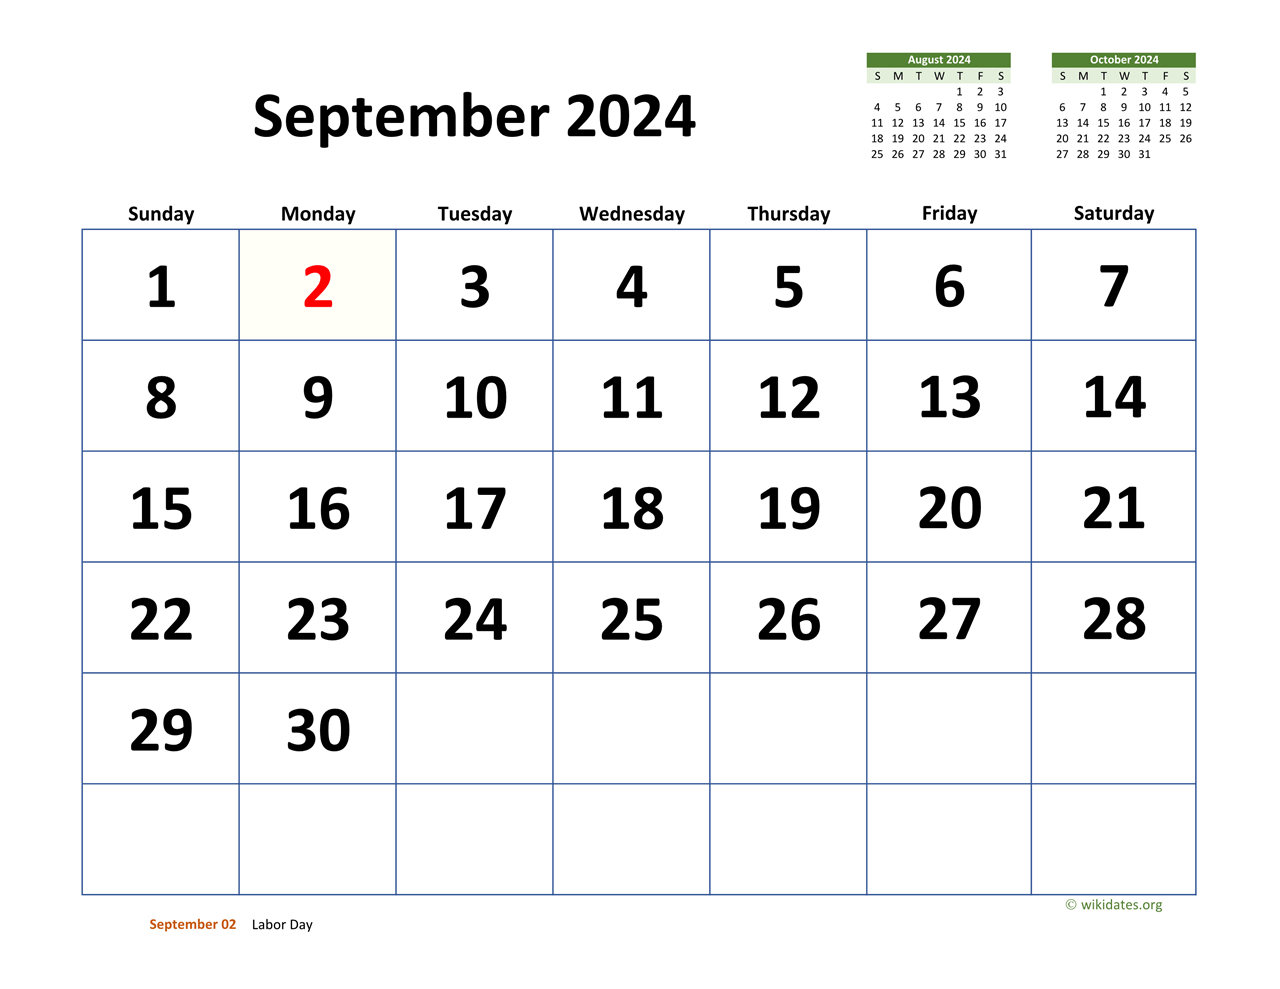 September 2024 Calendar with Extralarge Dates